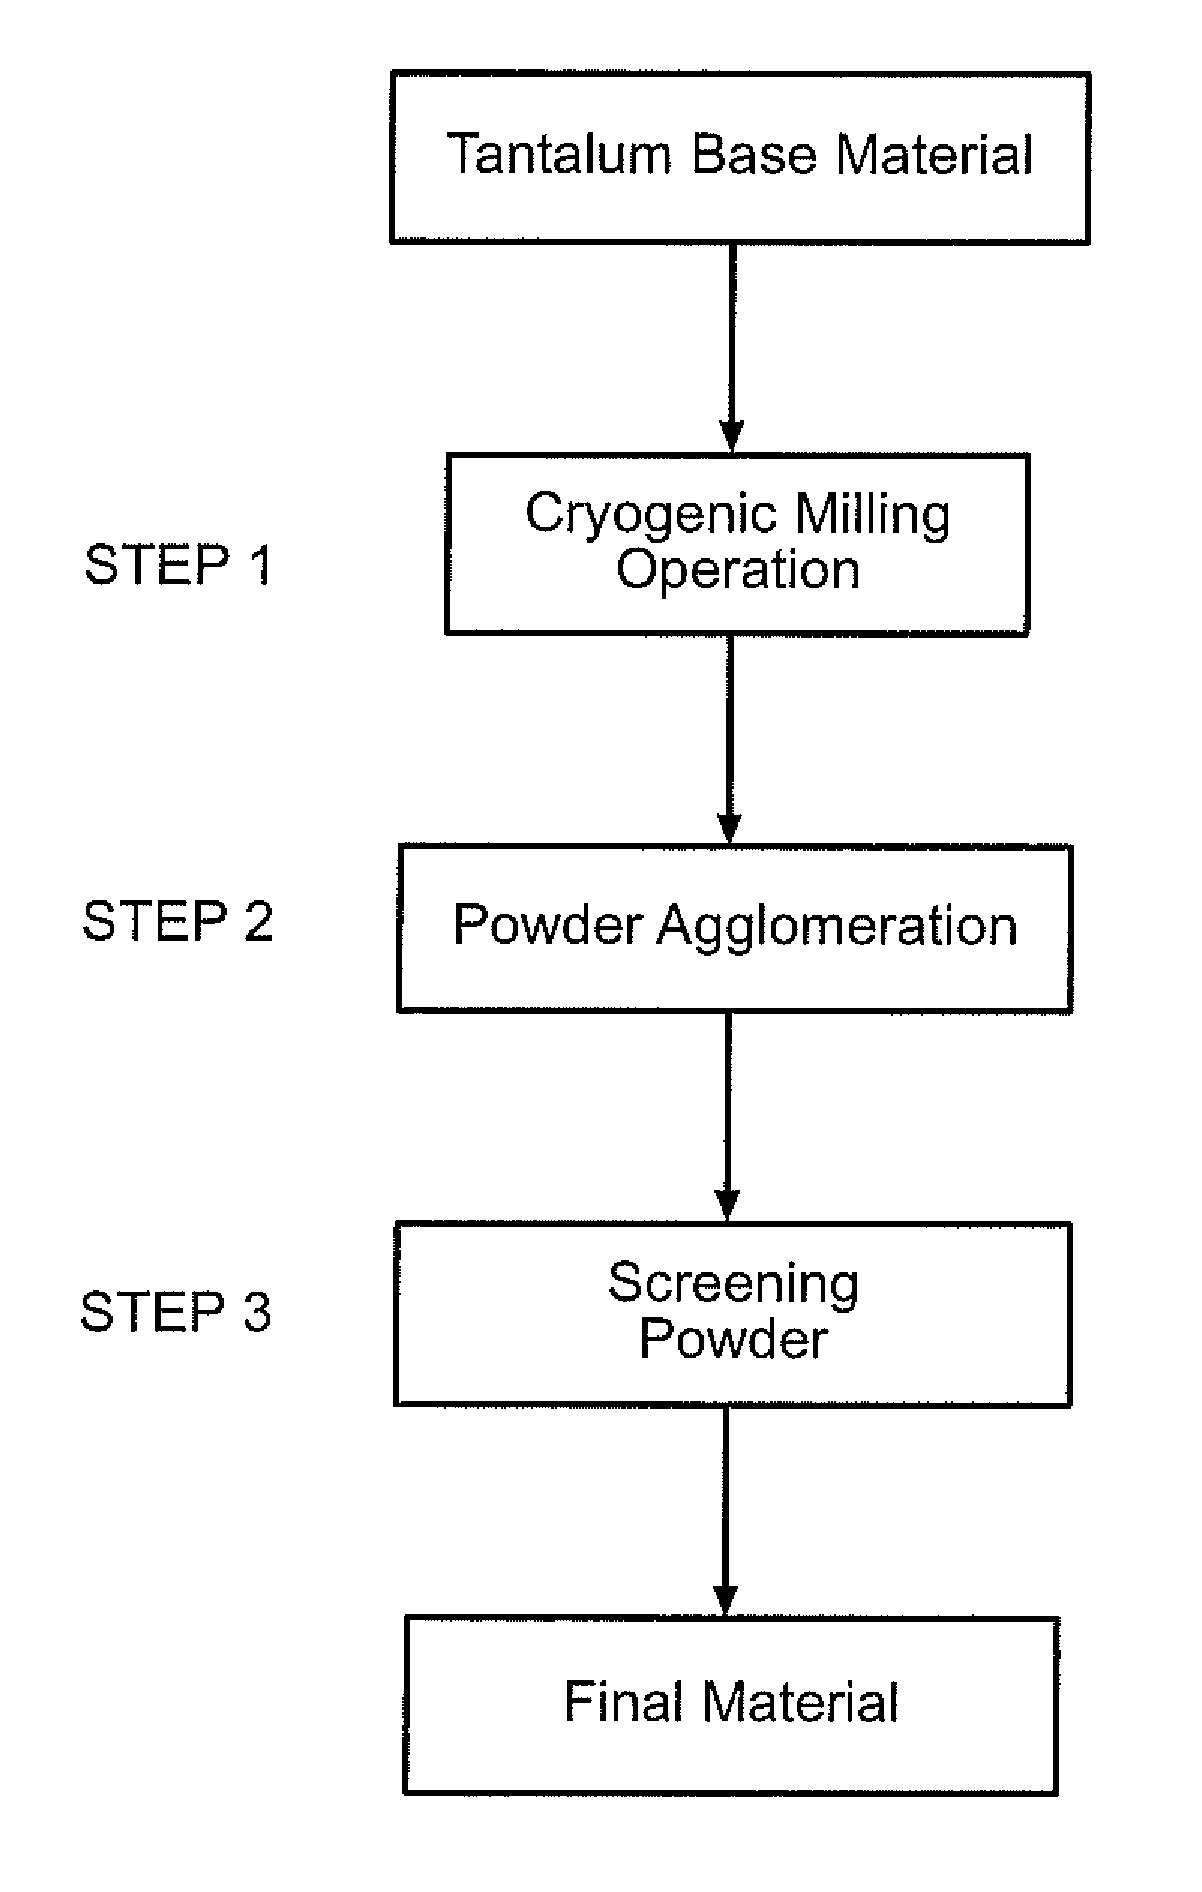 Cryogenic grinding of tantalum for use in capacitor manufacture